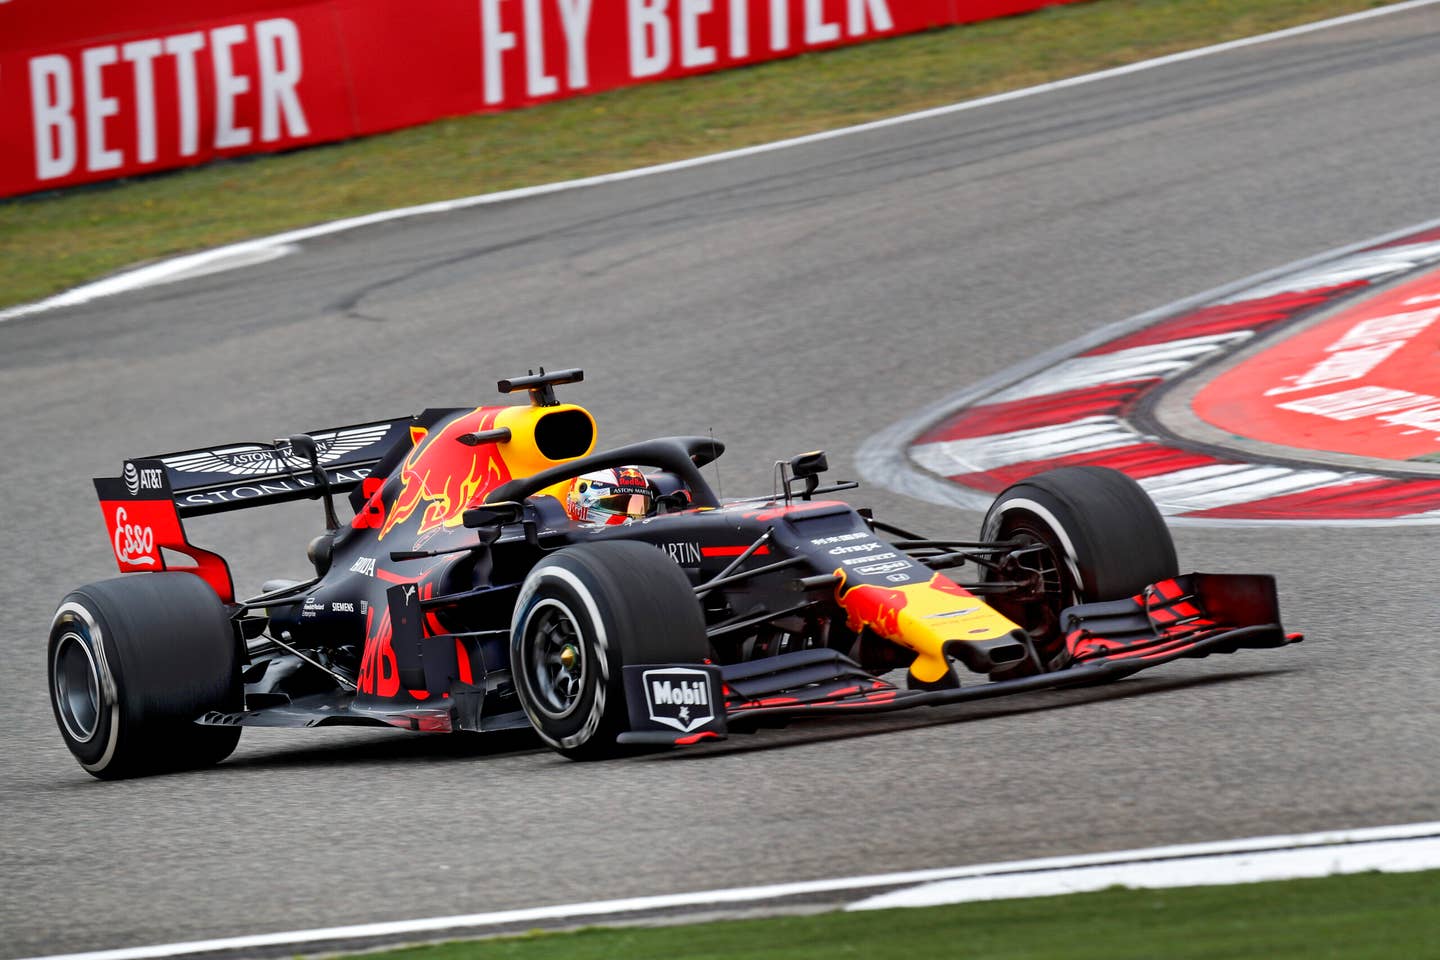 Red Bull driver Max Verstappen of the Netherlands steers his car during the Chinese Formula One Grand Prix at the Shanghai International Circuit in Shanghai, Sunday, April 14, 2019. (AP Photo/Andy Wong)